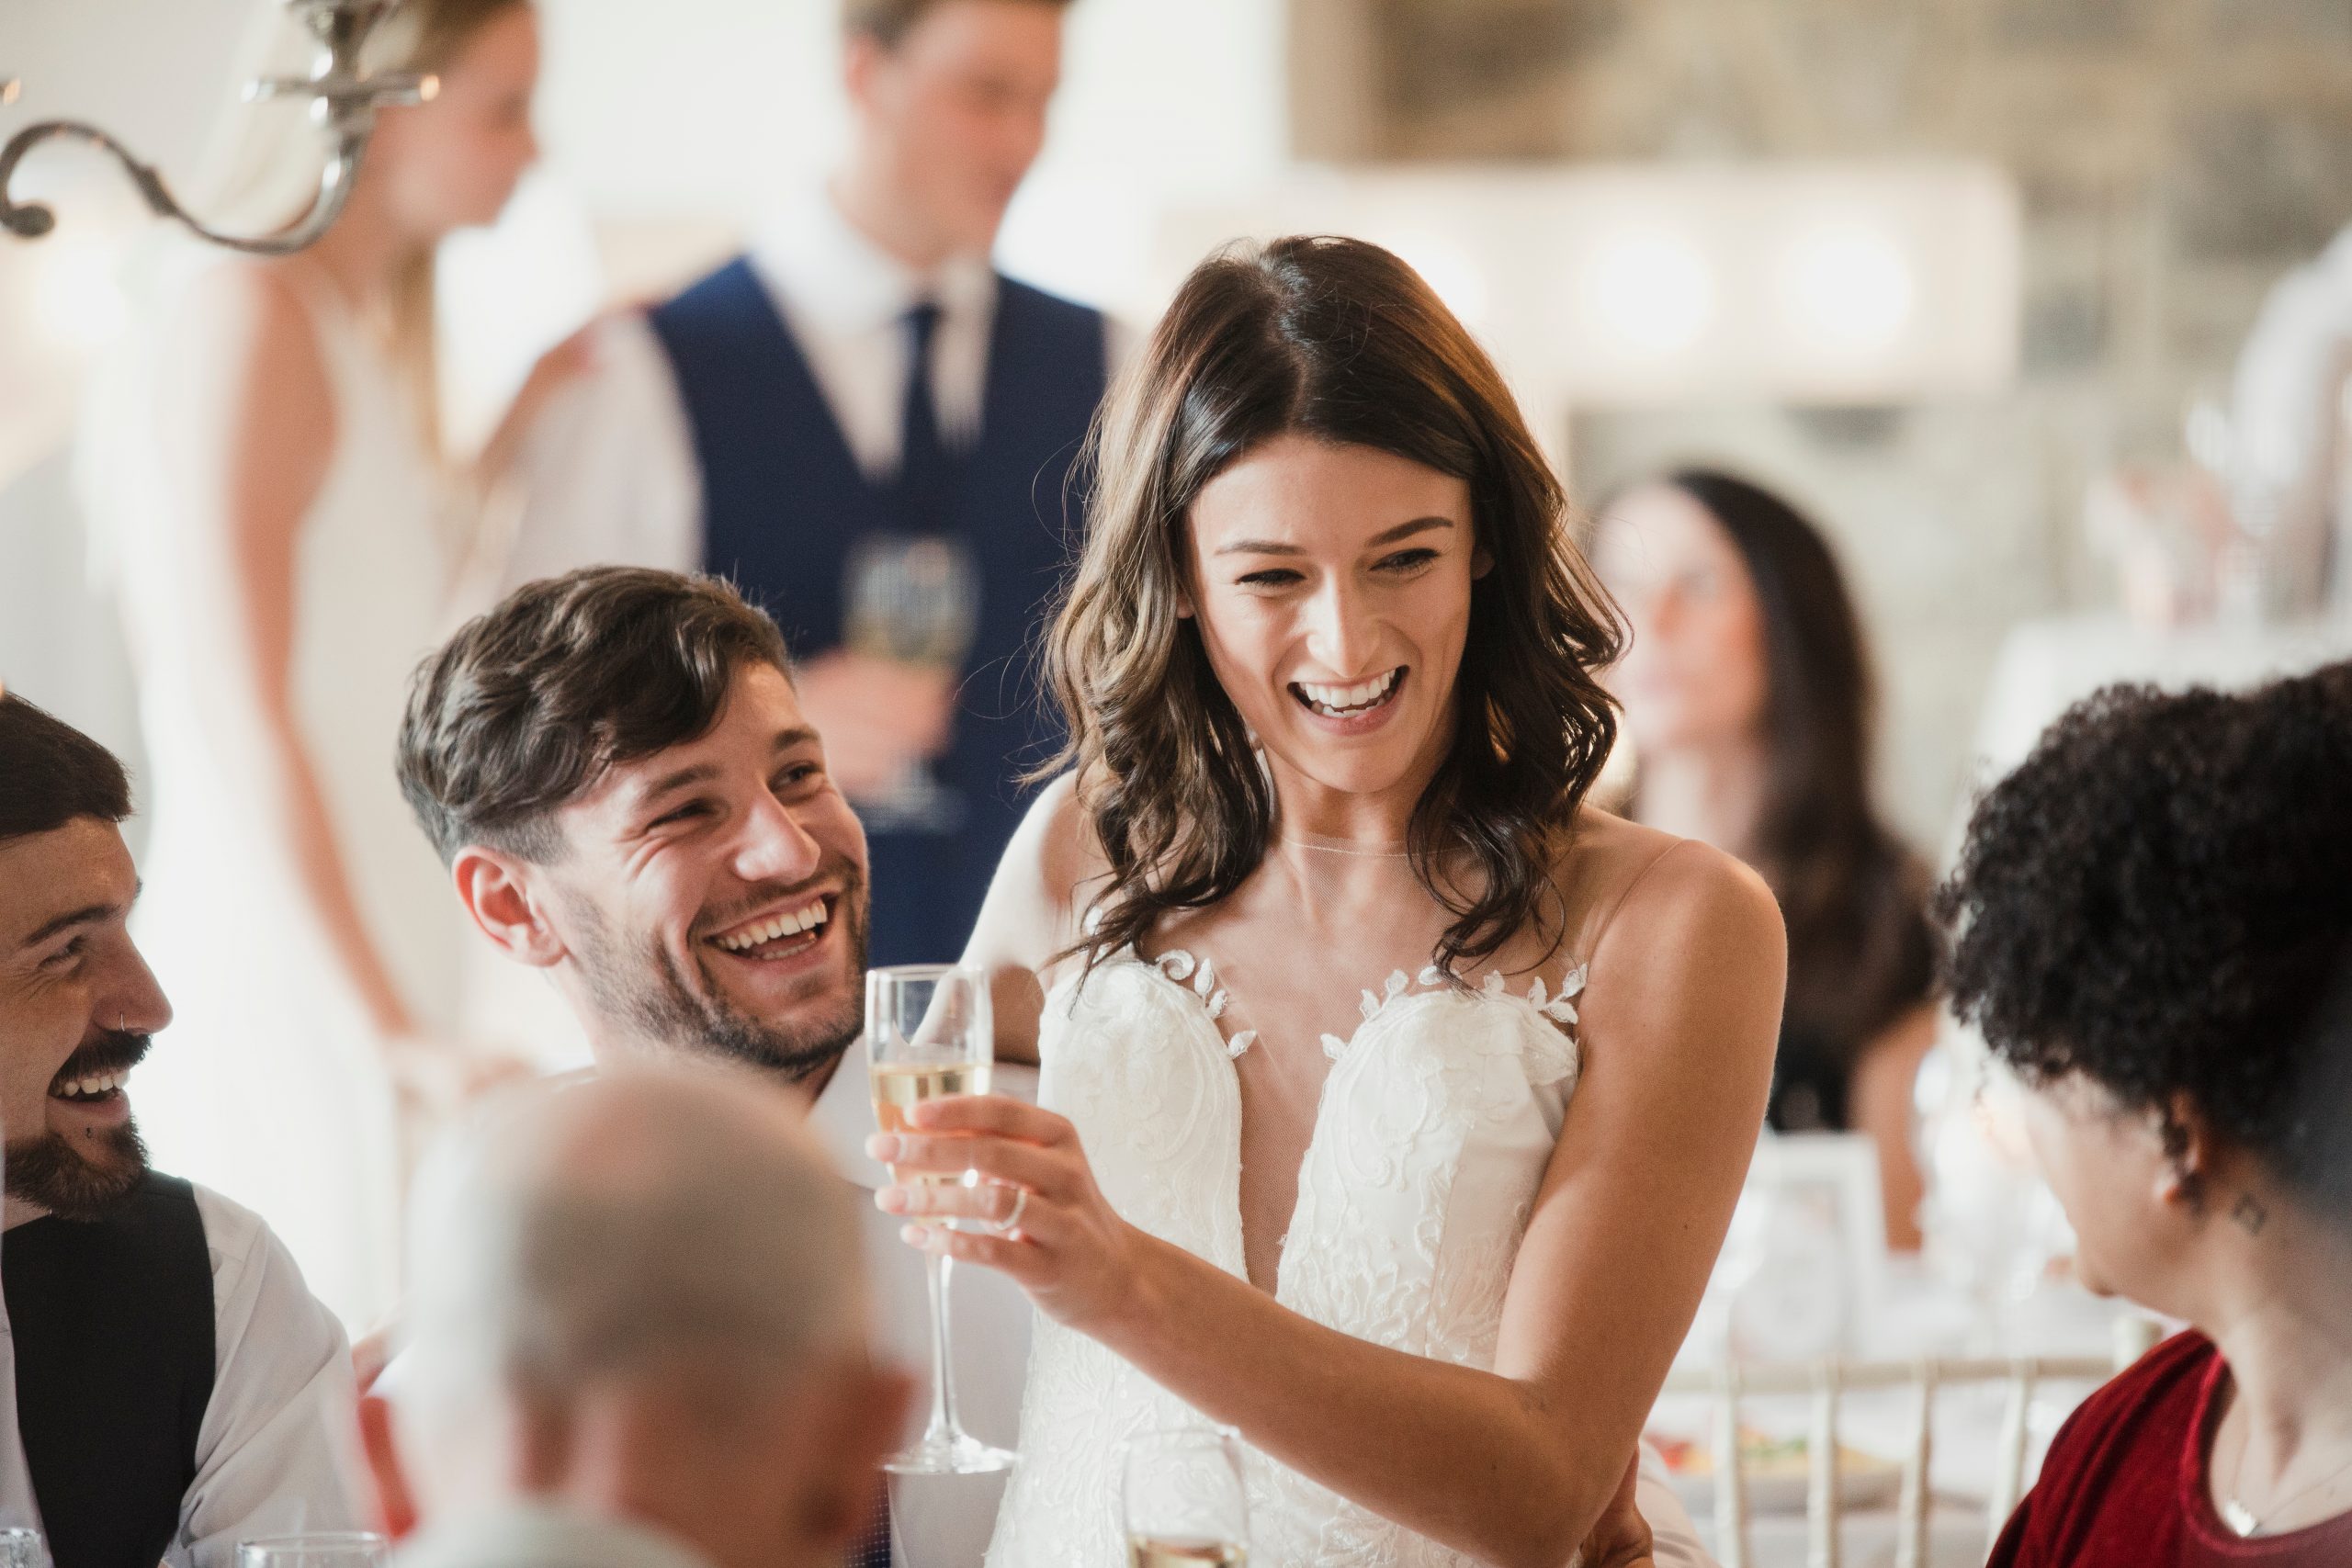 10 Creative Wedding Games Your Guests Will Love - Wedding Journal